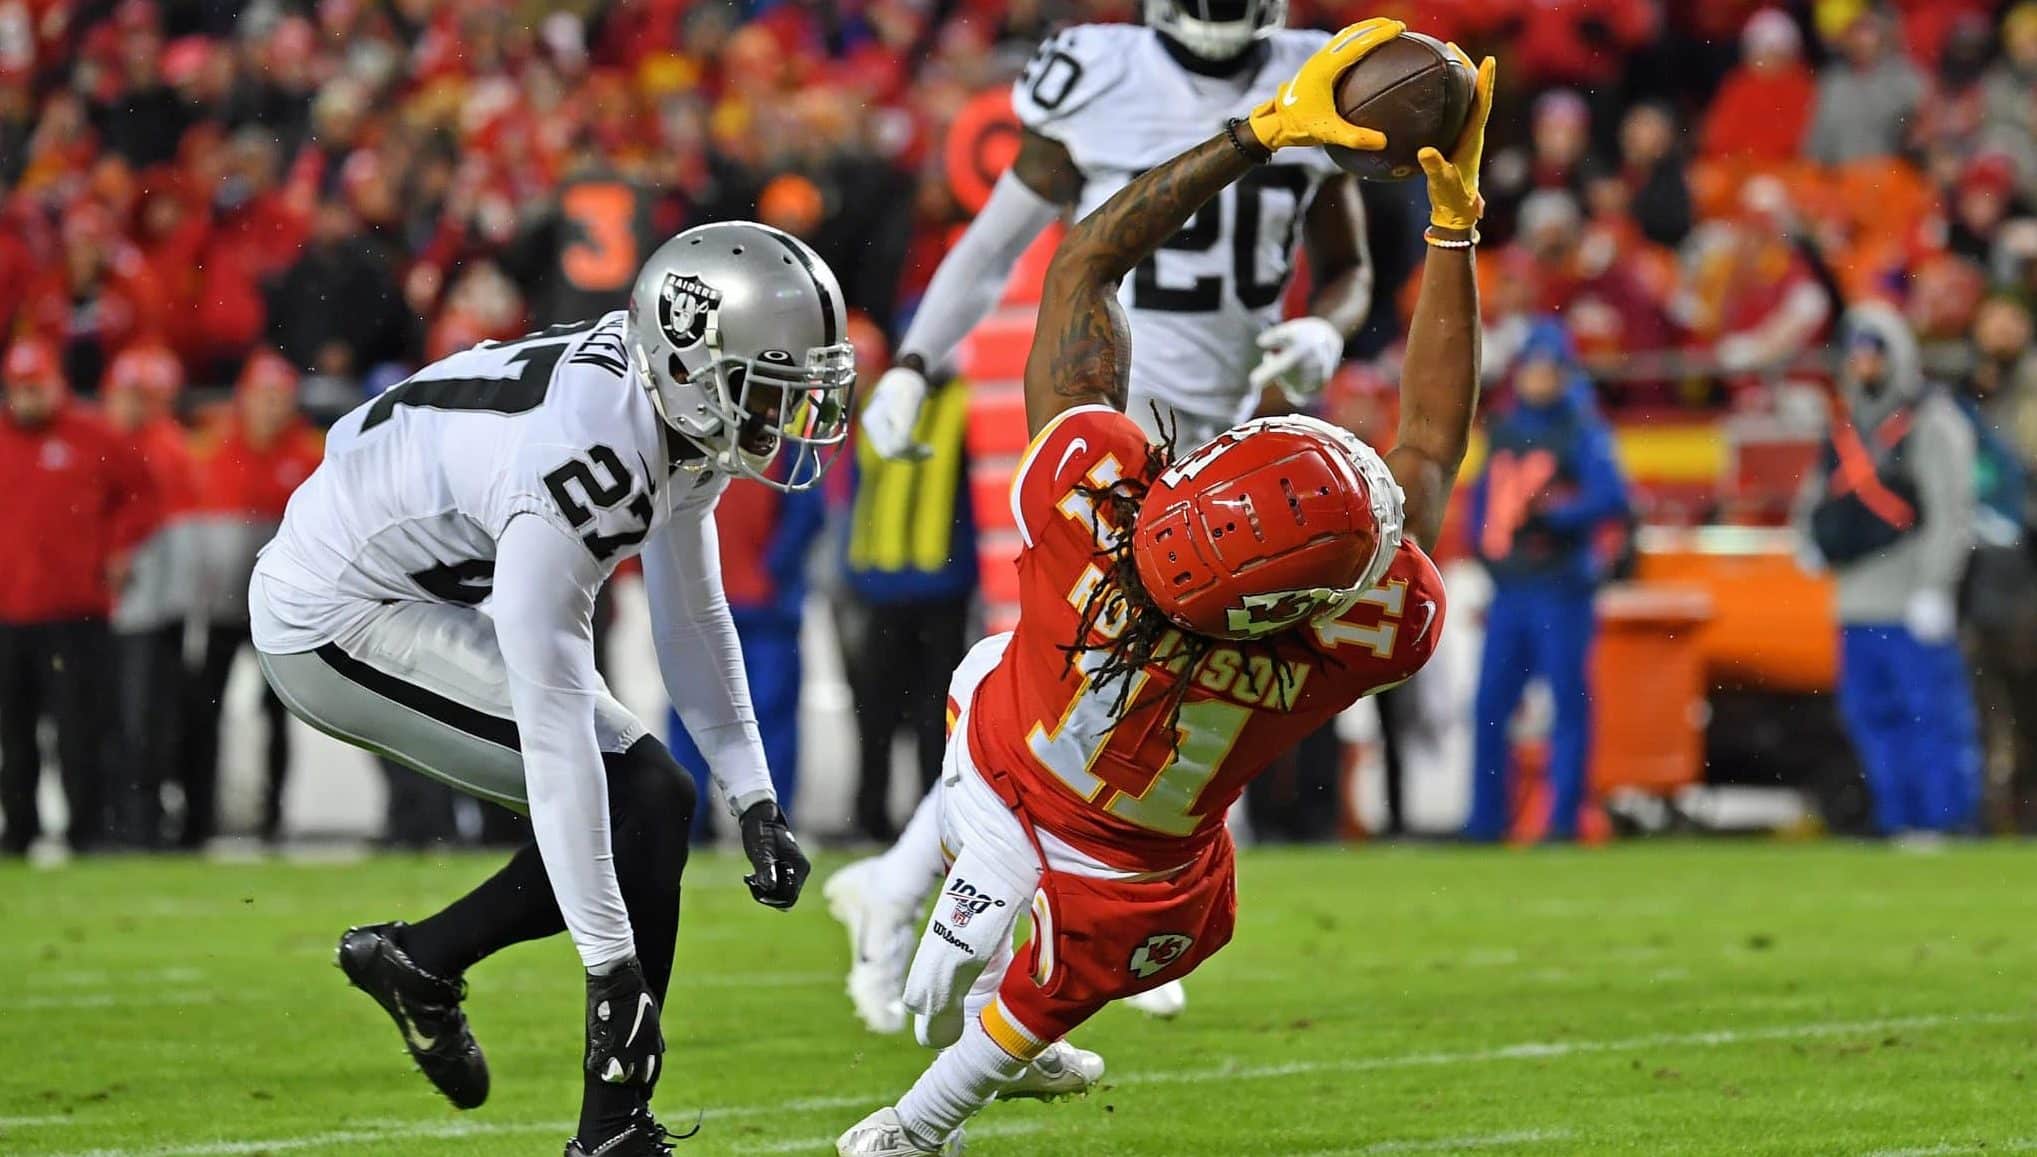 KANSAS CITY, MO - DECEMBER 01: Wide receiver Demarcus Robinson #11 of the Kansas City Chiefs stretches for extra yardage against cornerback Trayvon Mullen #27 of the Oakland Raiders during the second half at Arrowhead Stadium on December 1, 2019 in Kansas City, Missouri.